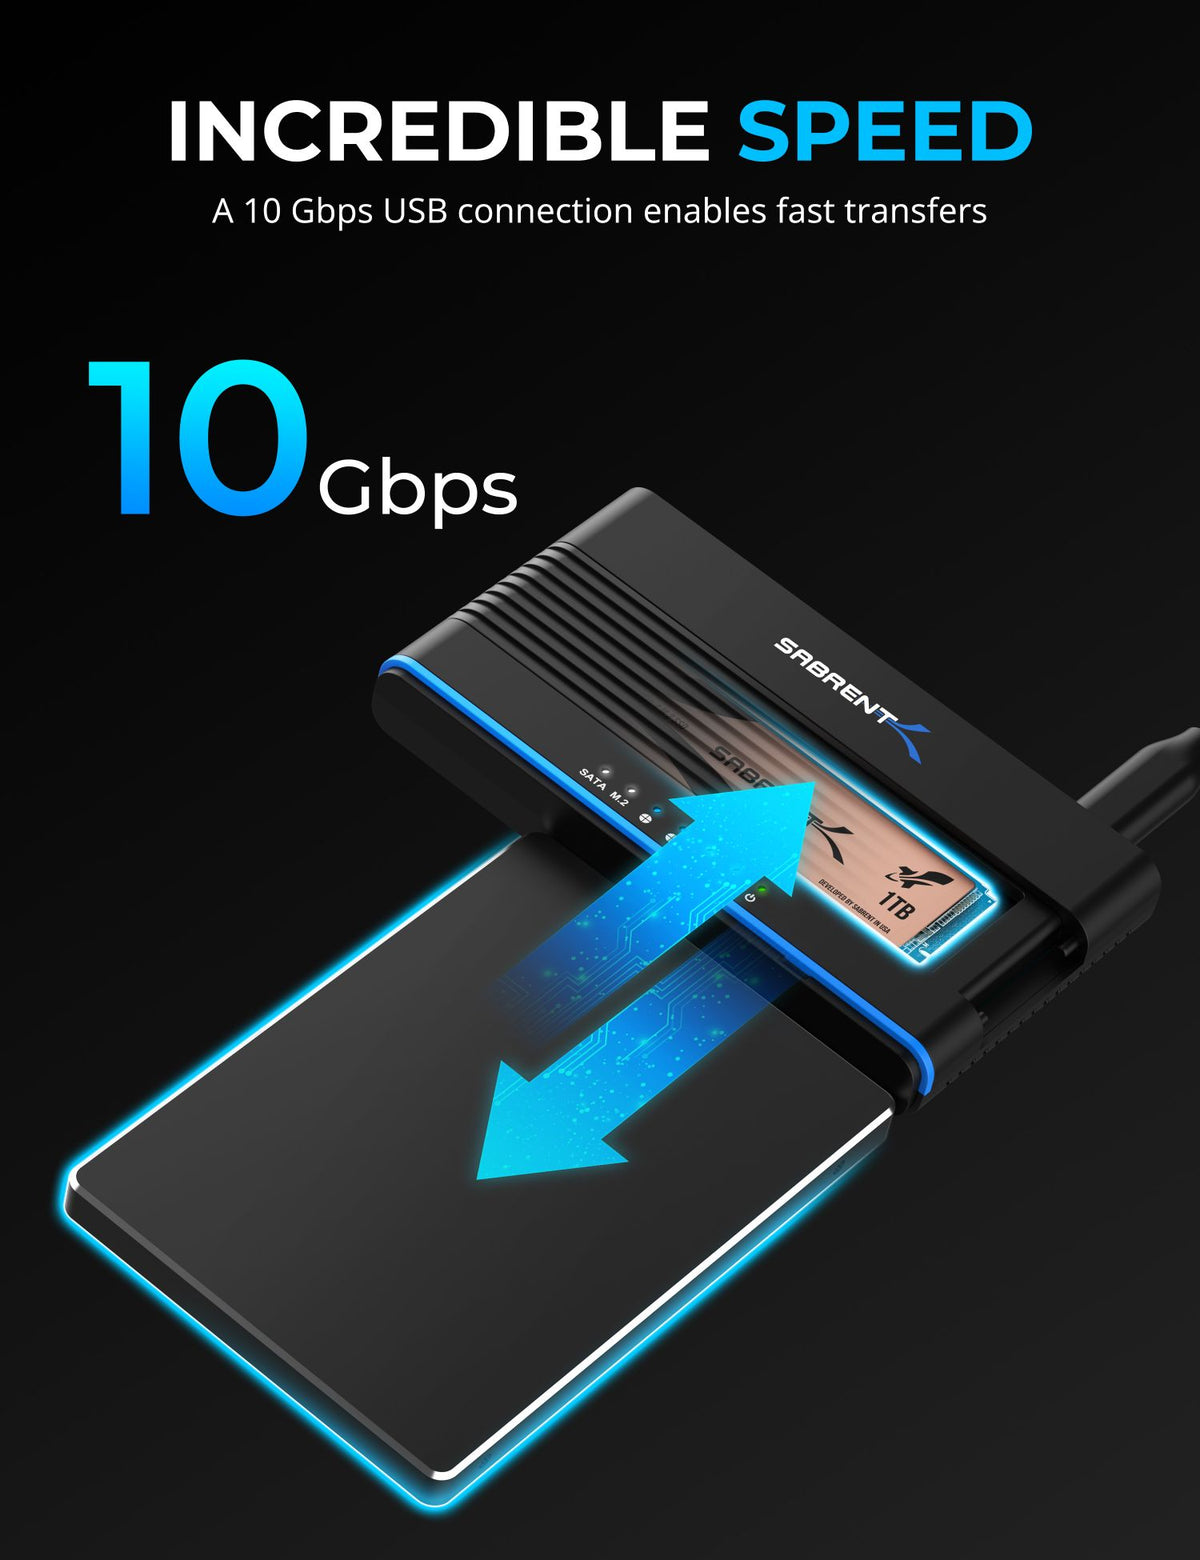 USB 3.2 Type C M.2 PCIe NVMe + 2.5/3.5 Inch SSD &amp; HDD Converter